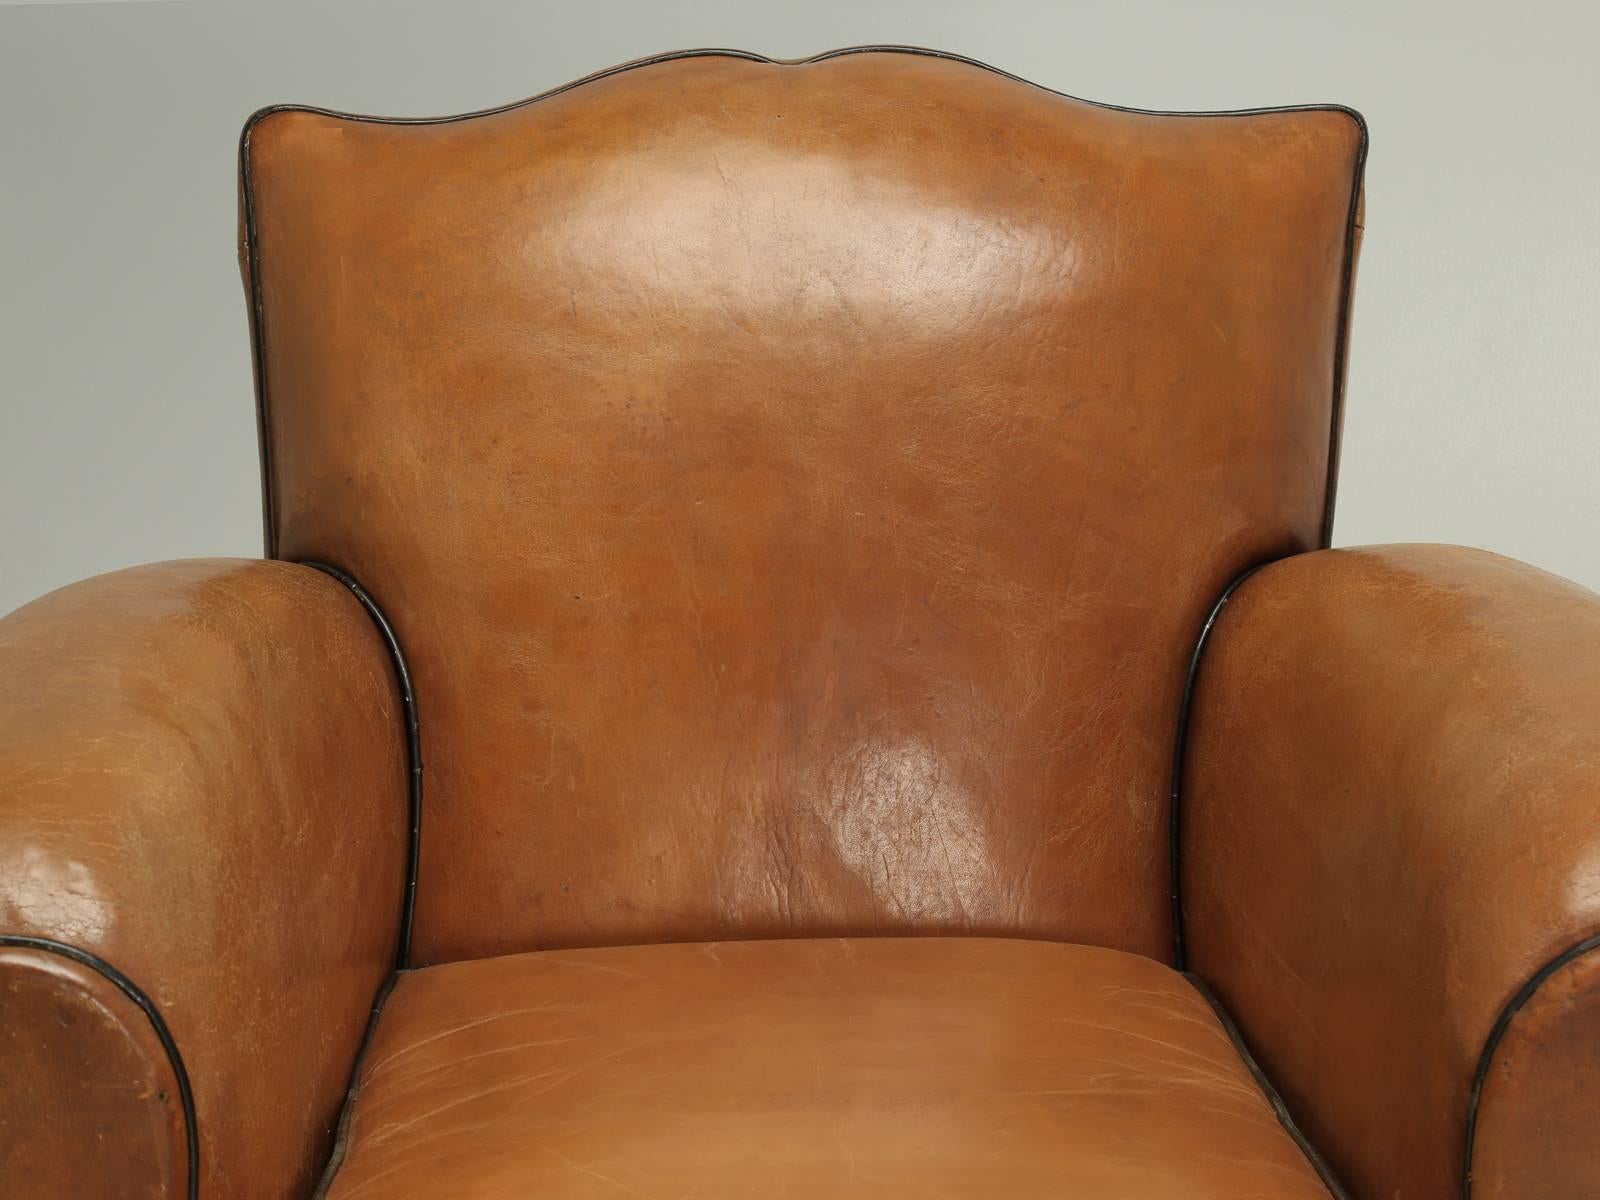 French Leather Club Chairs and nothing says it any clearer, than a pair of “Moustache Style” French club chairs. The moustache style club chair, has been for decades, the most desirable and sought-after design and to find a pair in this condition,